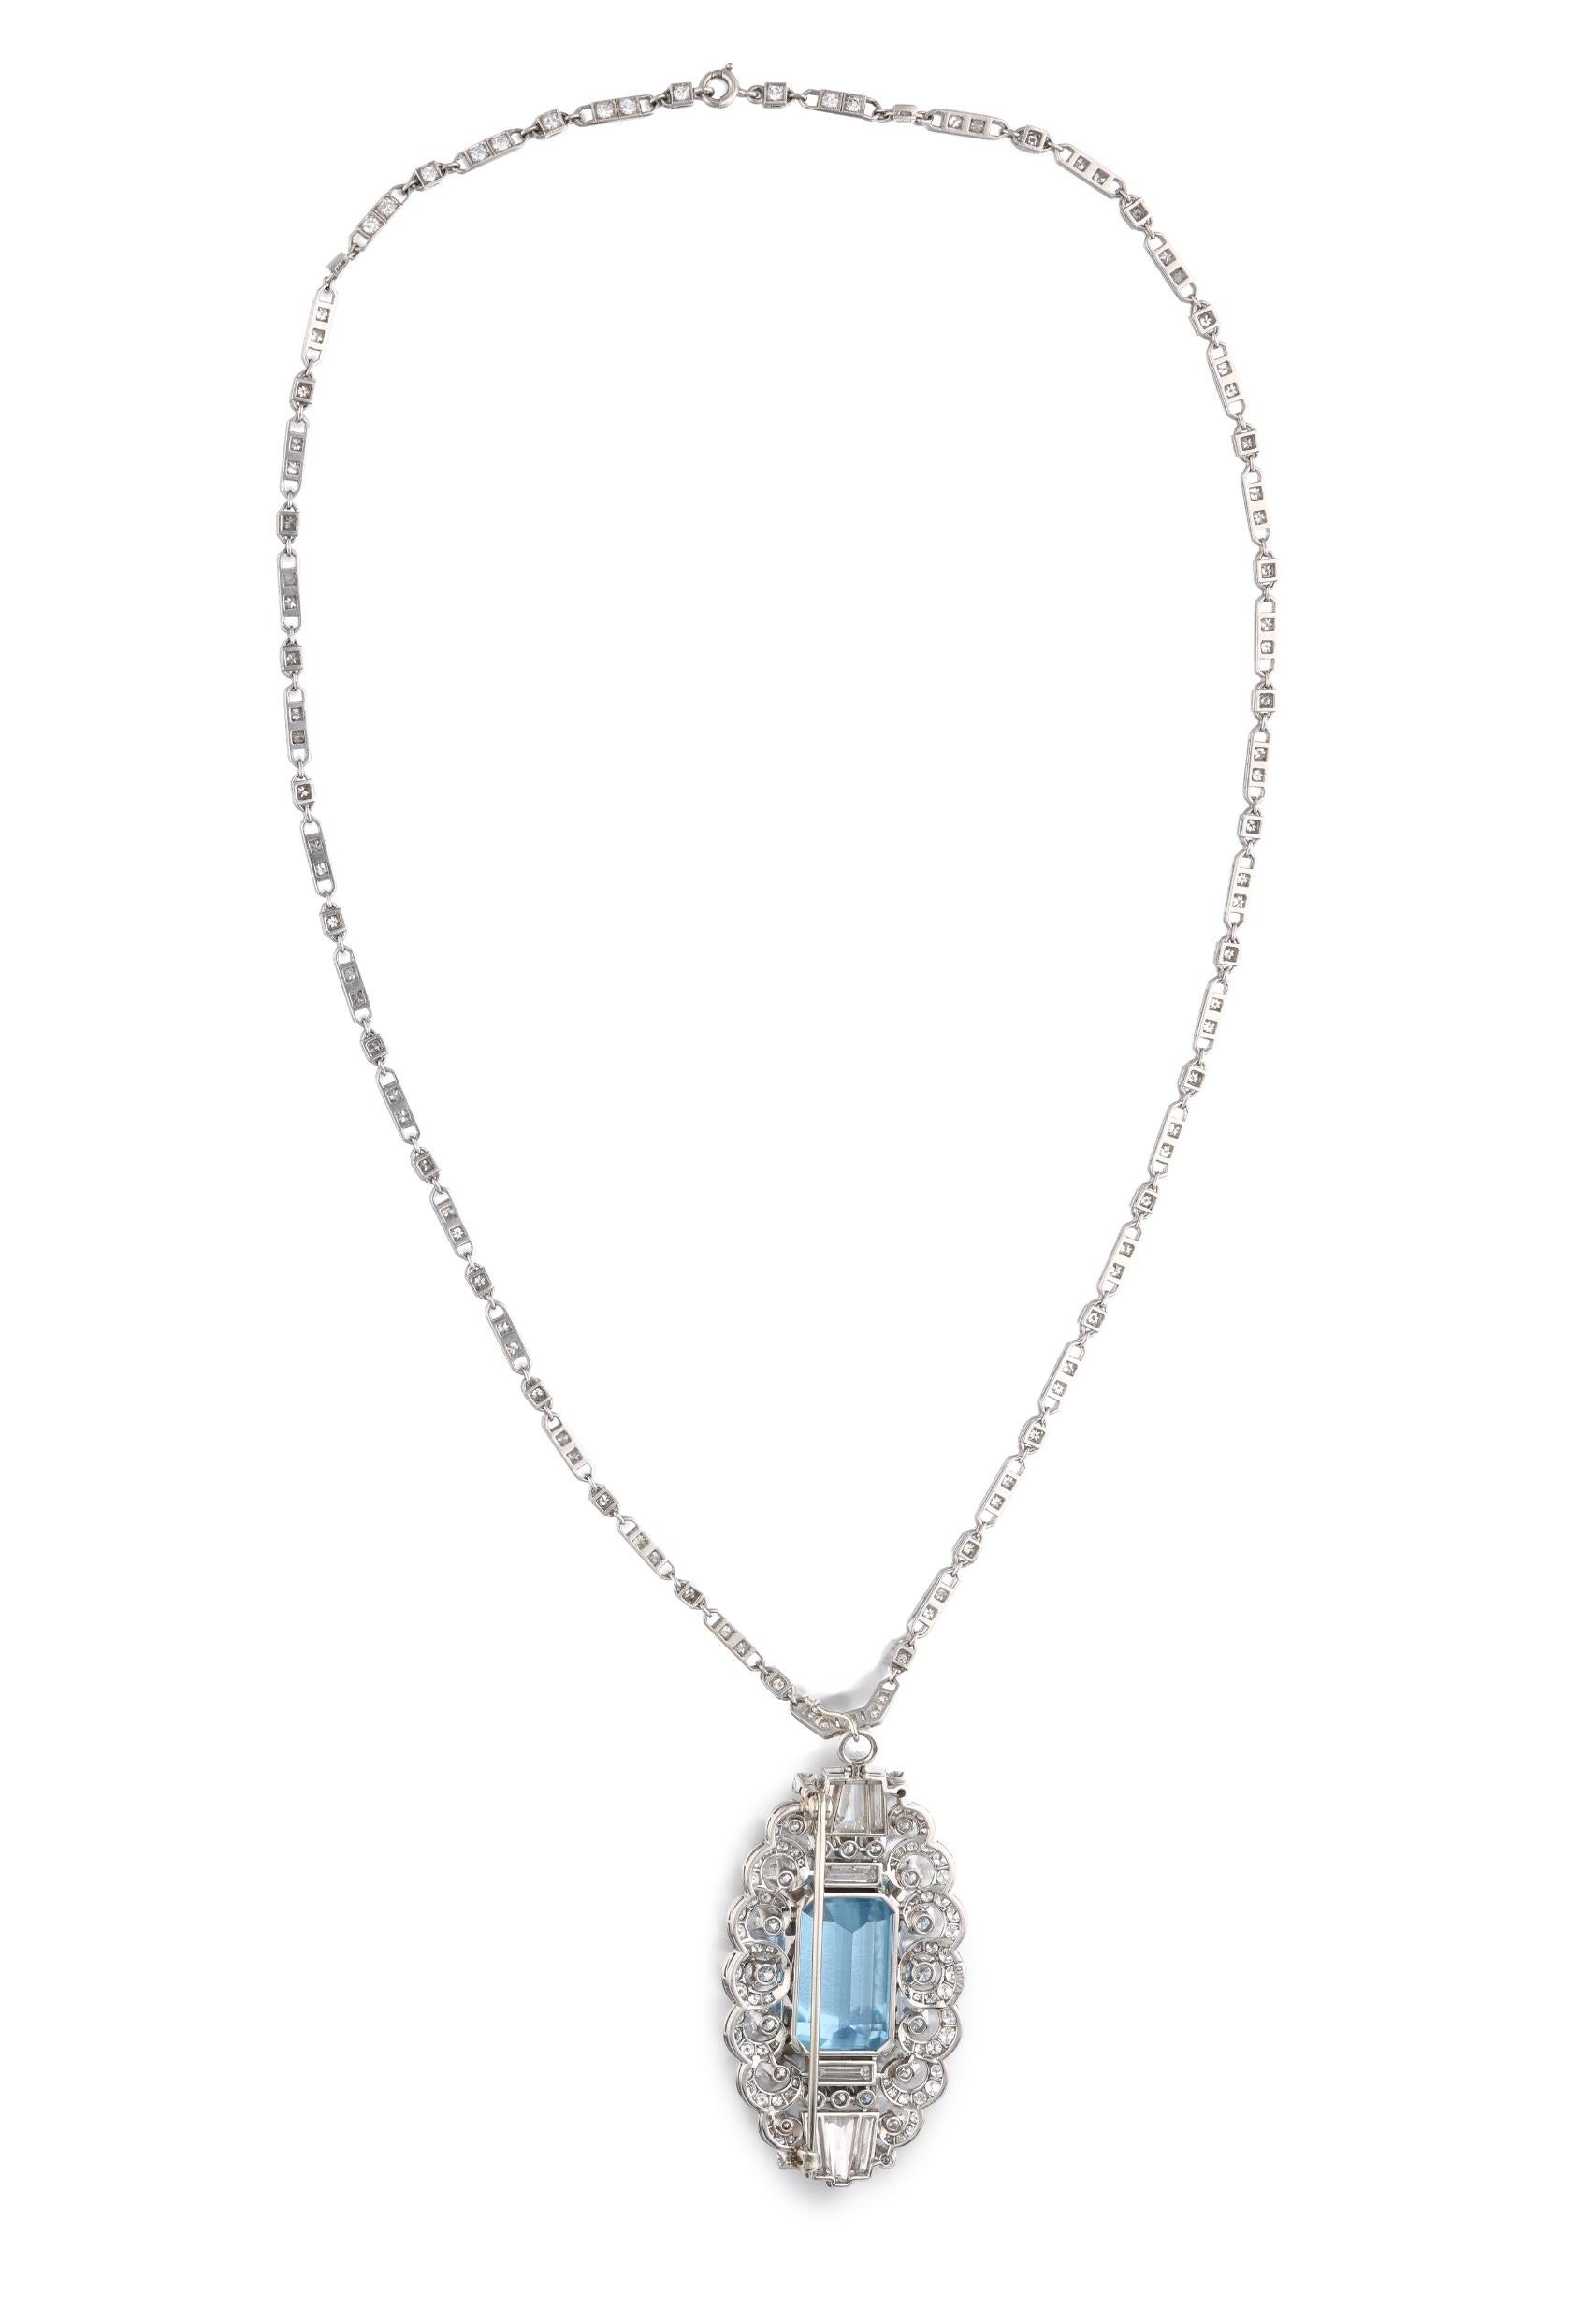 Raymond Yard necklace featuring a stunning emerald-cut aquamarine, weighing approximately 21 carats. This center stone is accented by round, baguette, and tapered baguette-shaped diamonds, weighing a total of approximately 10 carats. These stones